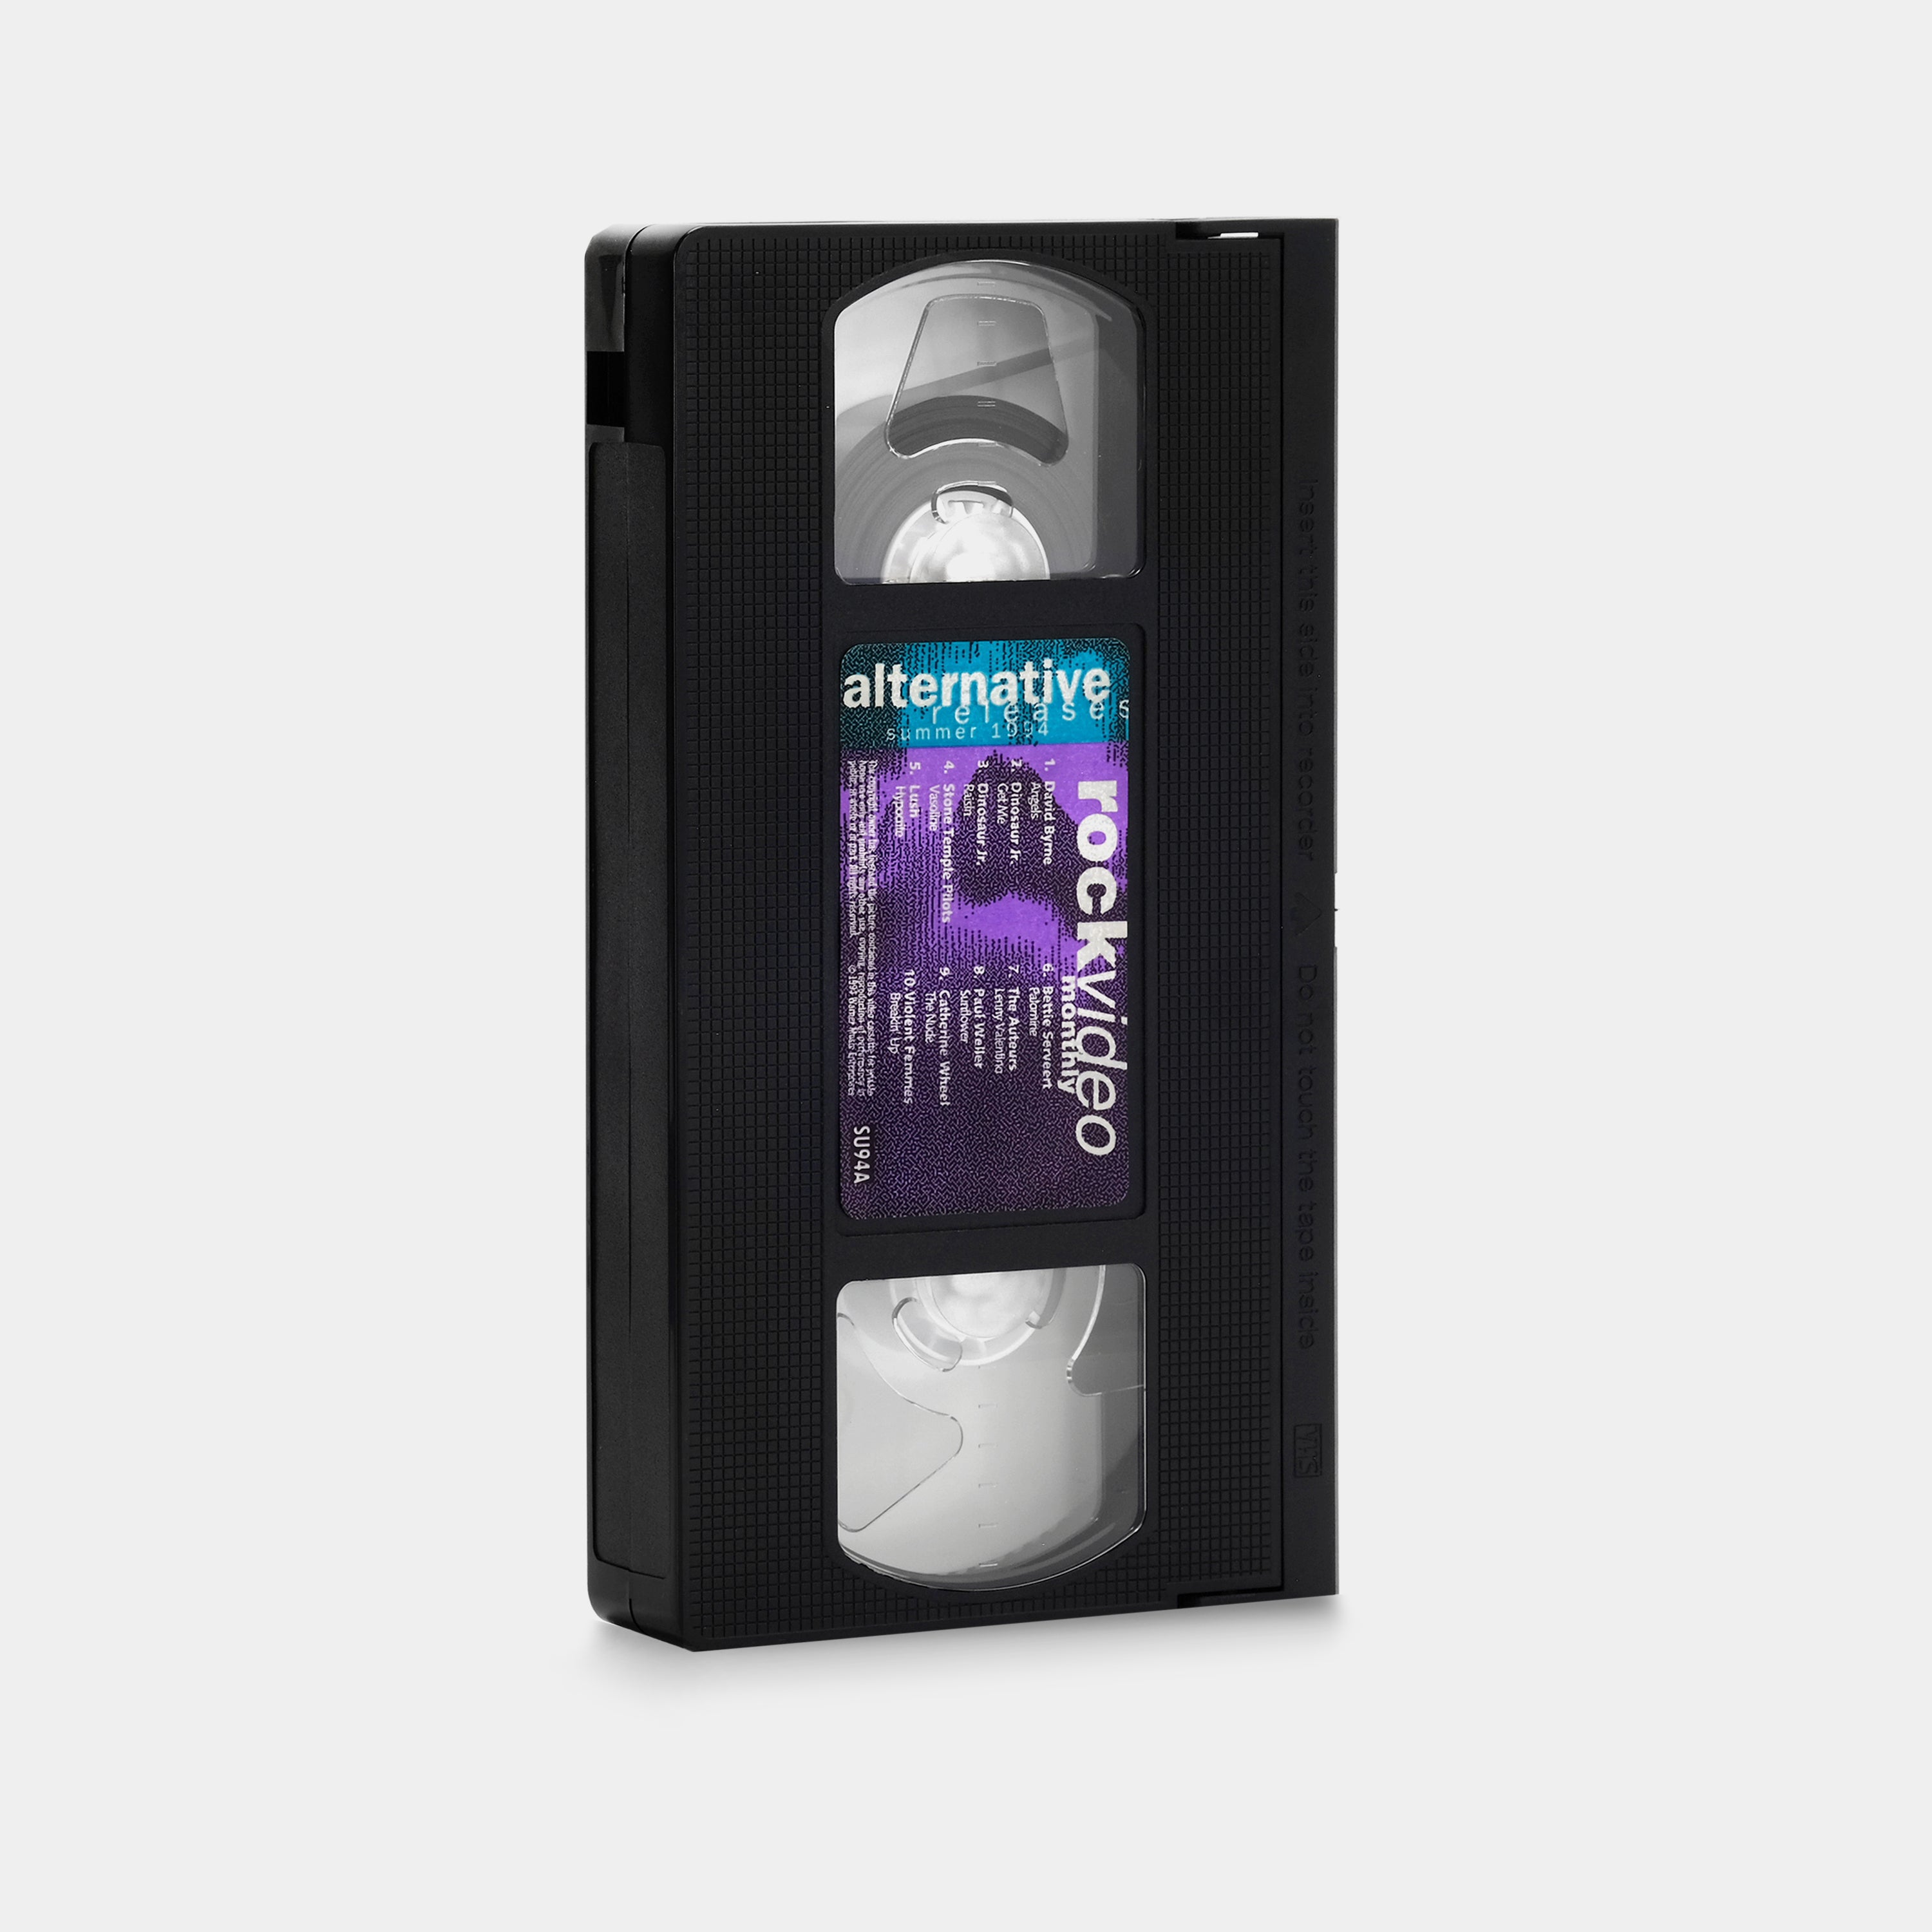 RockVideo Monthly - Alternative Releases Summer 1994 Special Edition VHS Tape